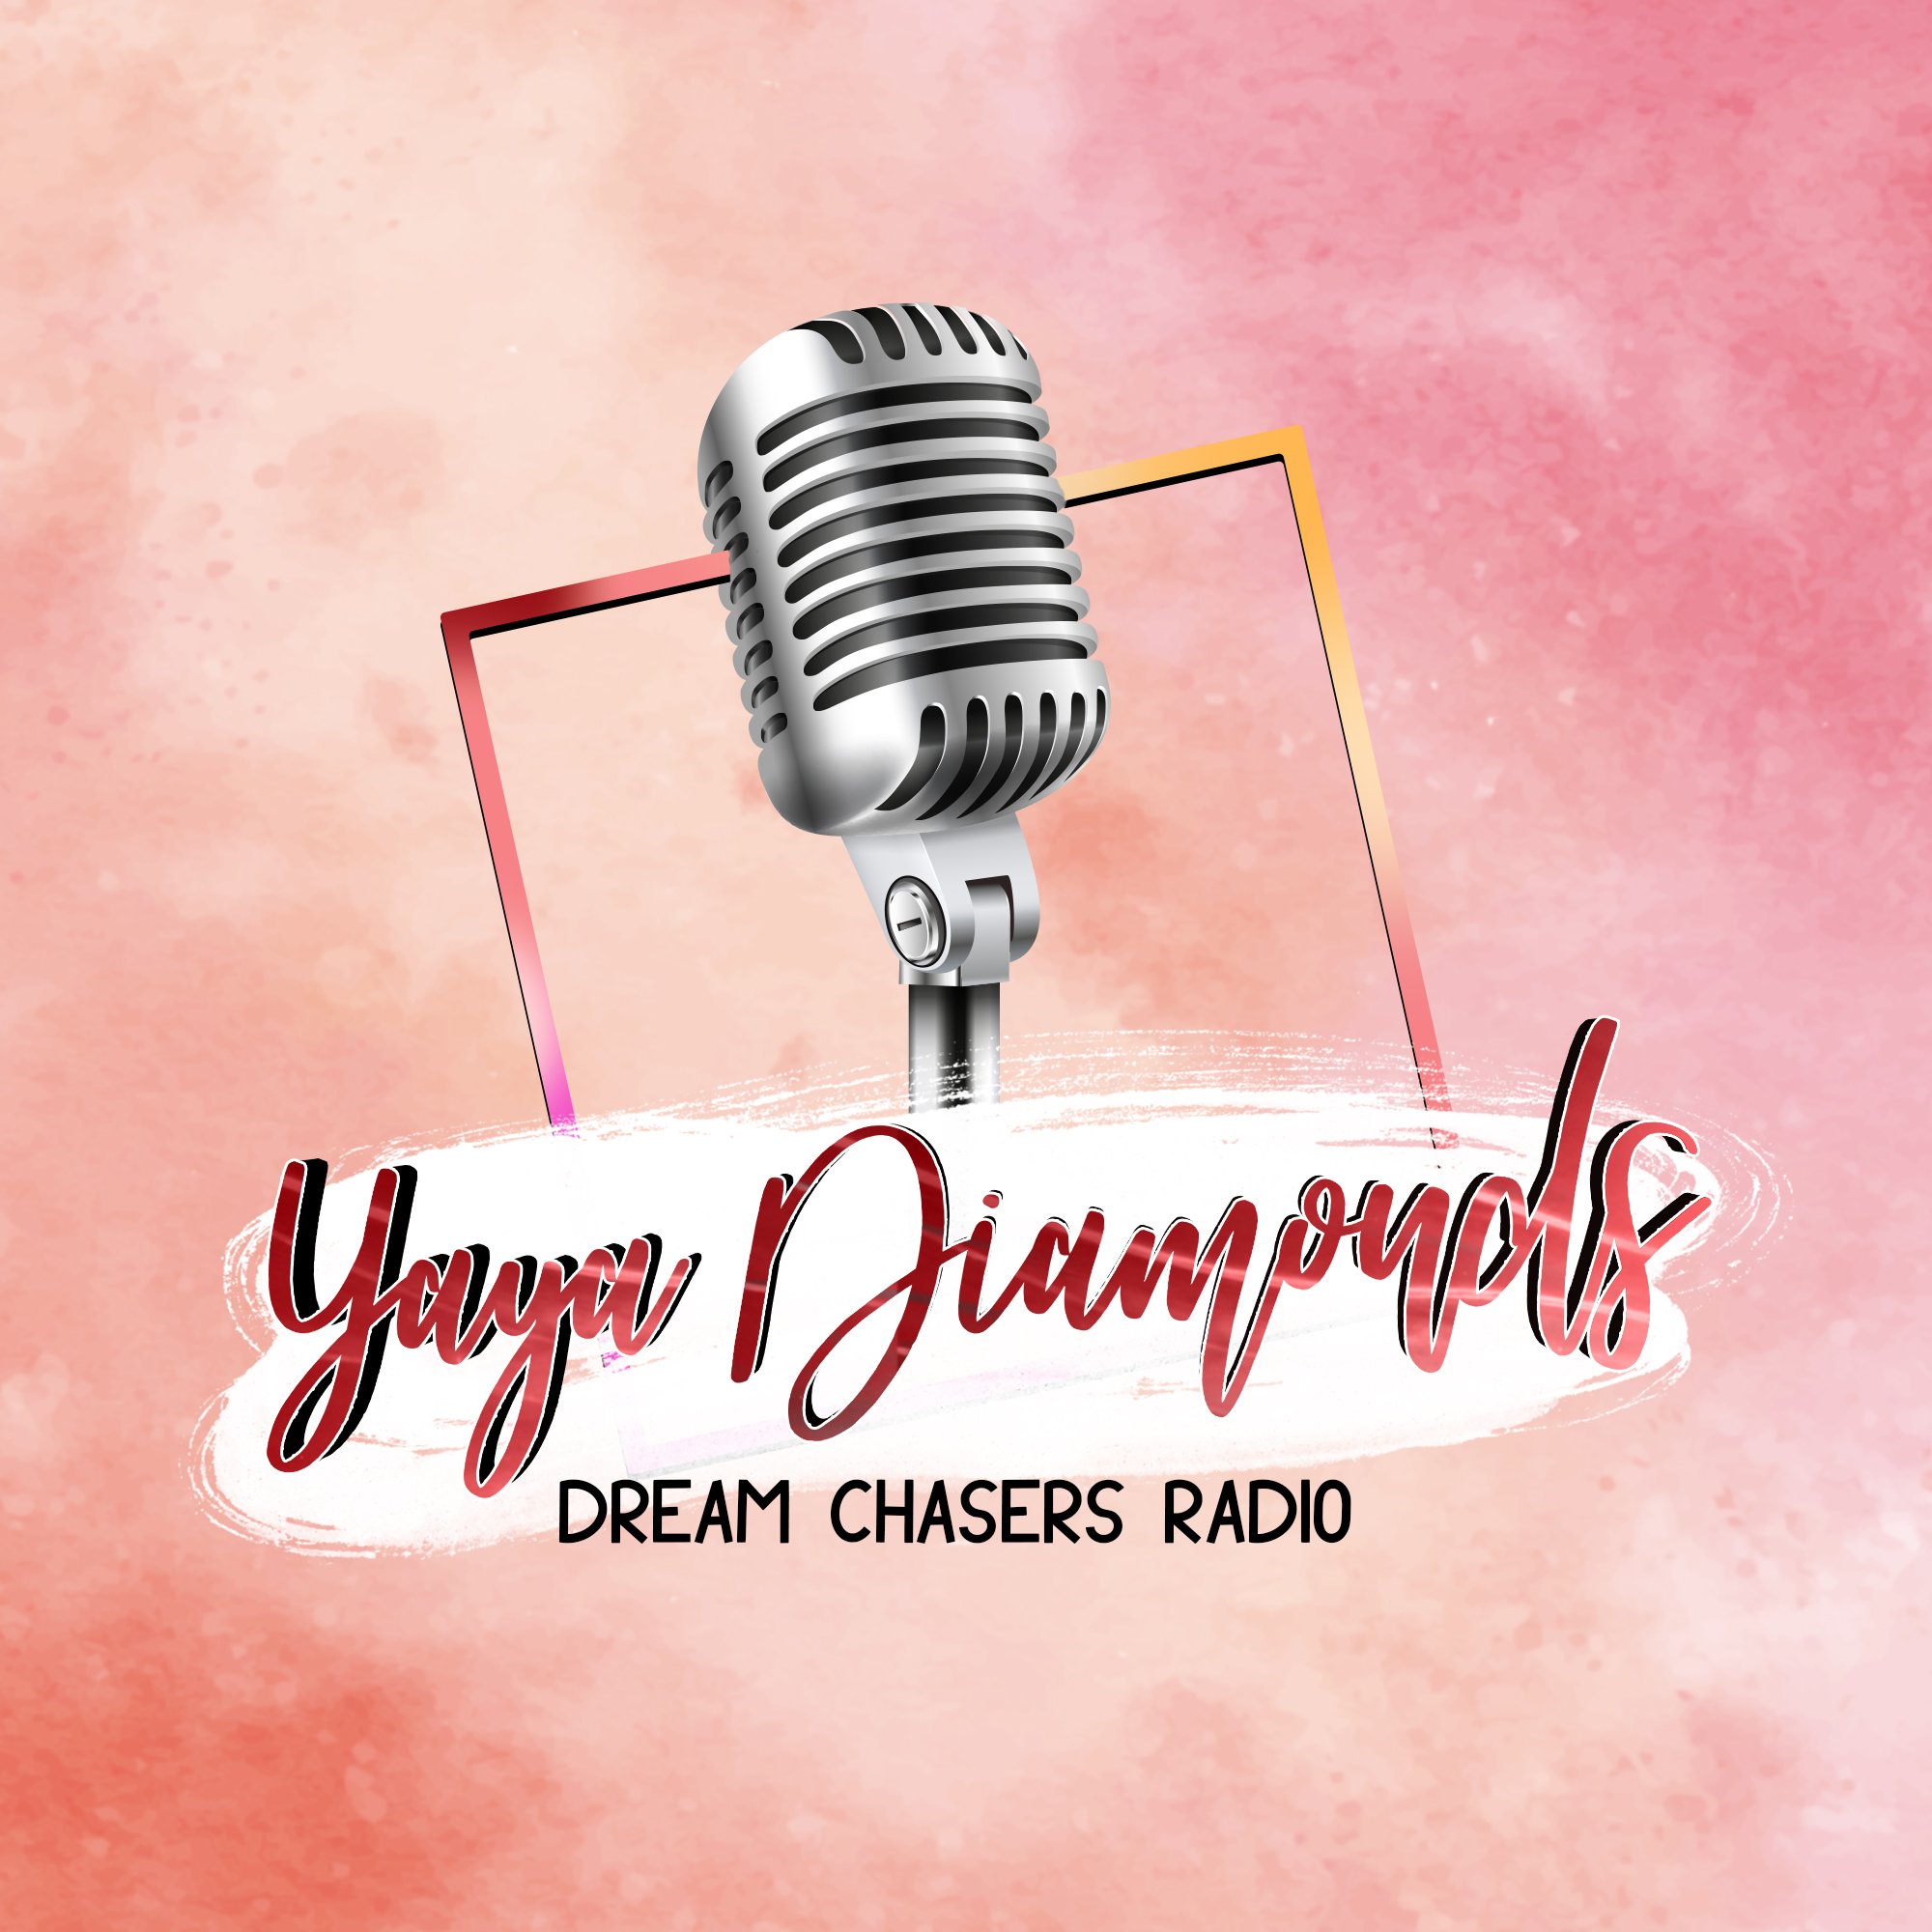 Profile artwork for Dream Chasers Radio